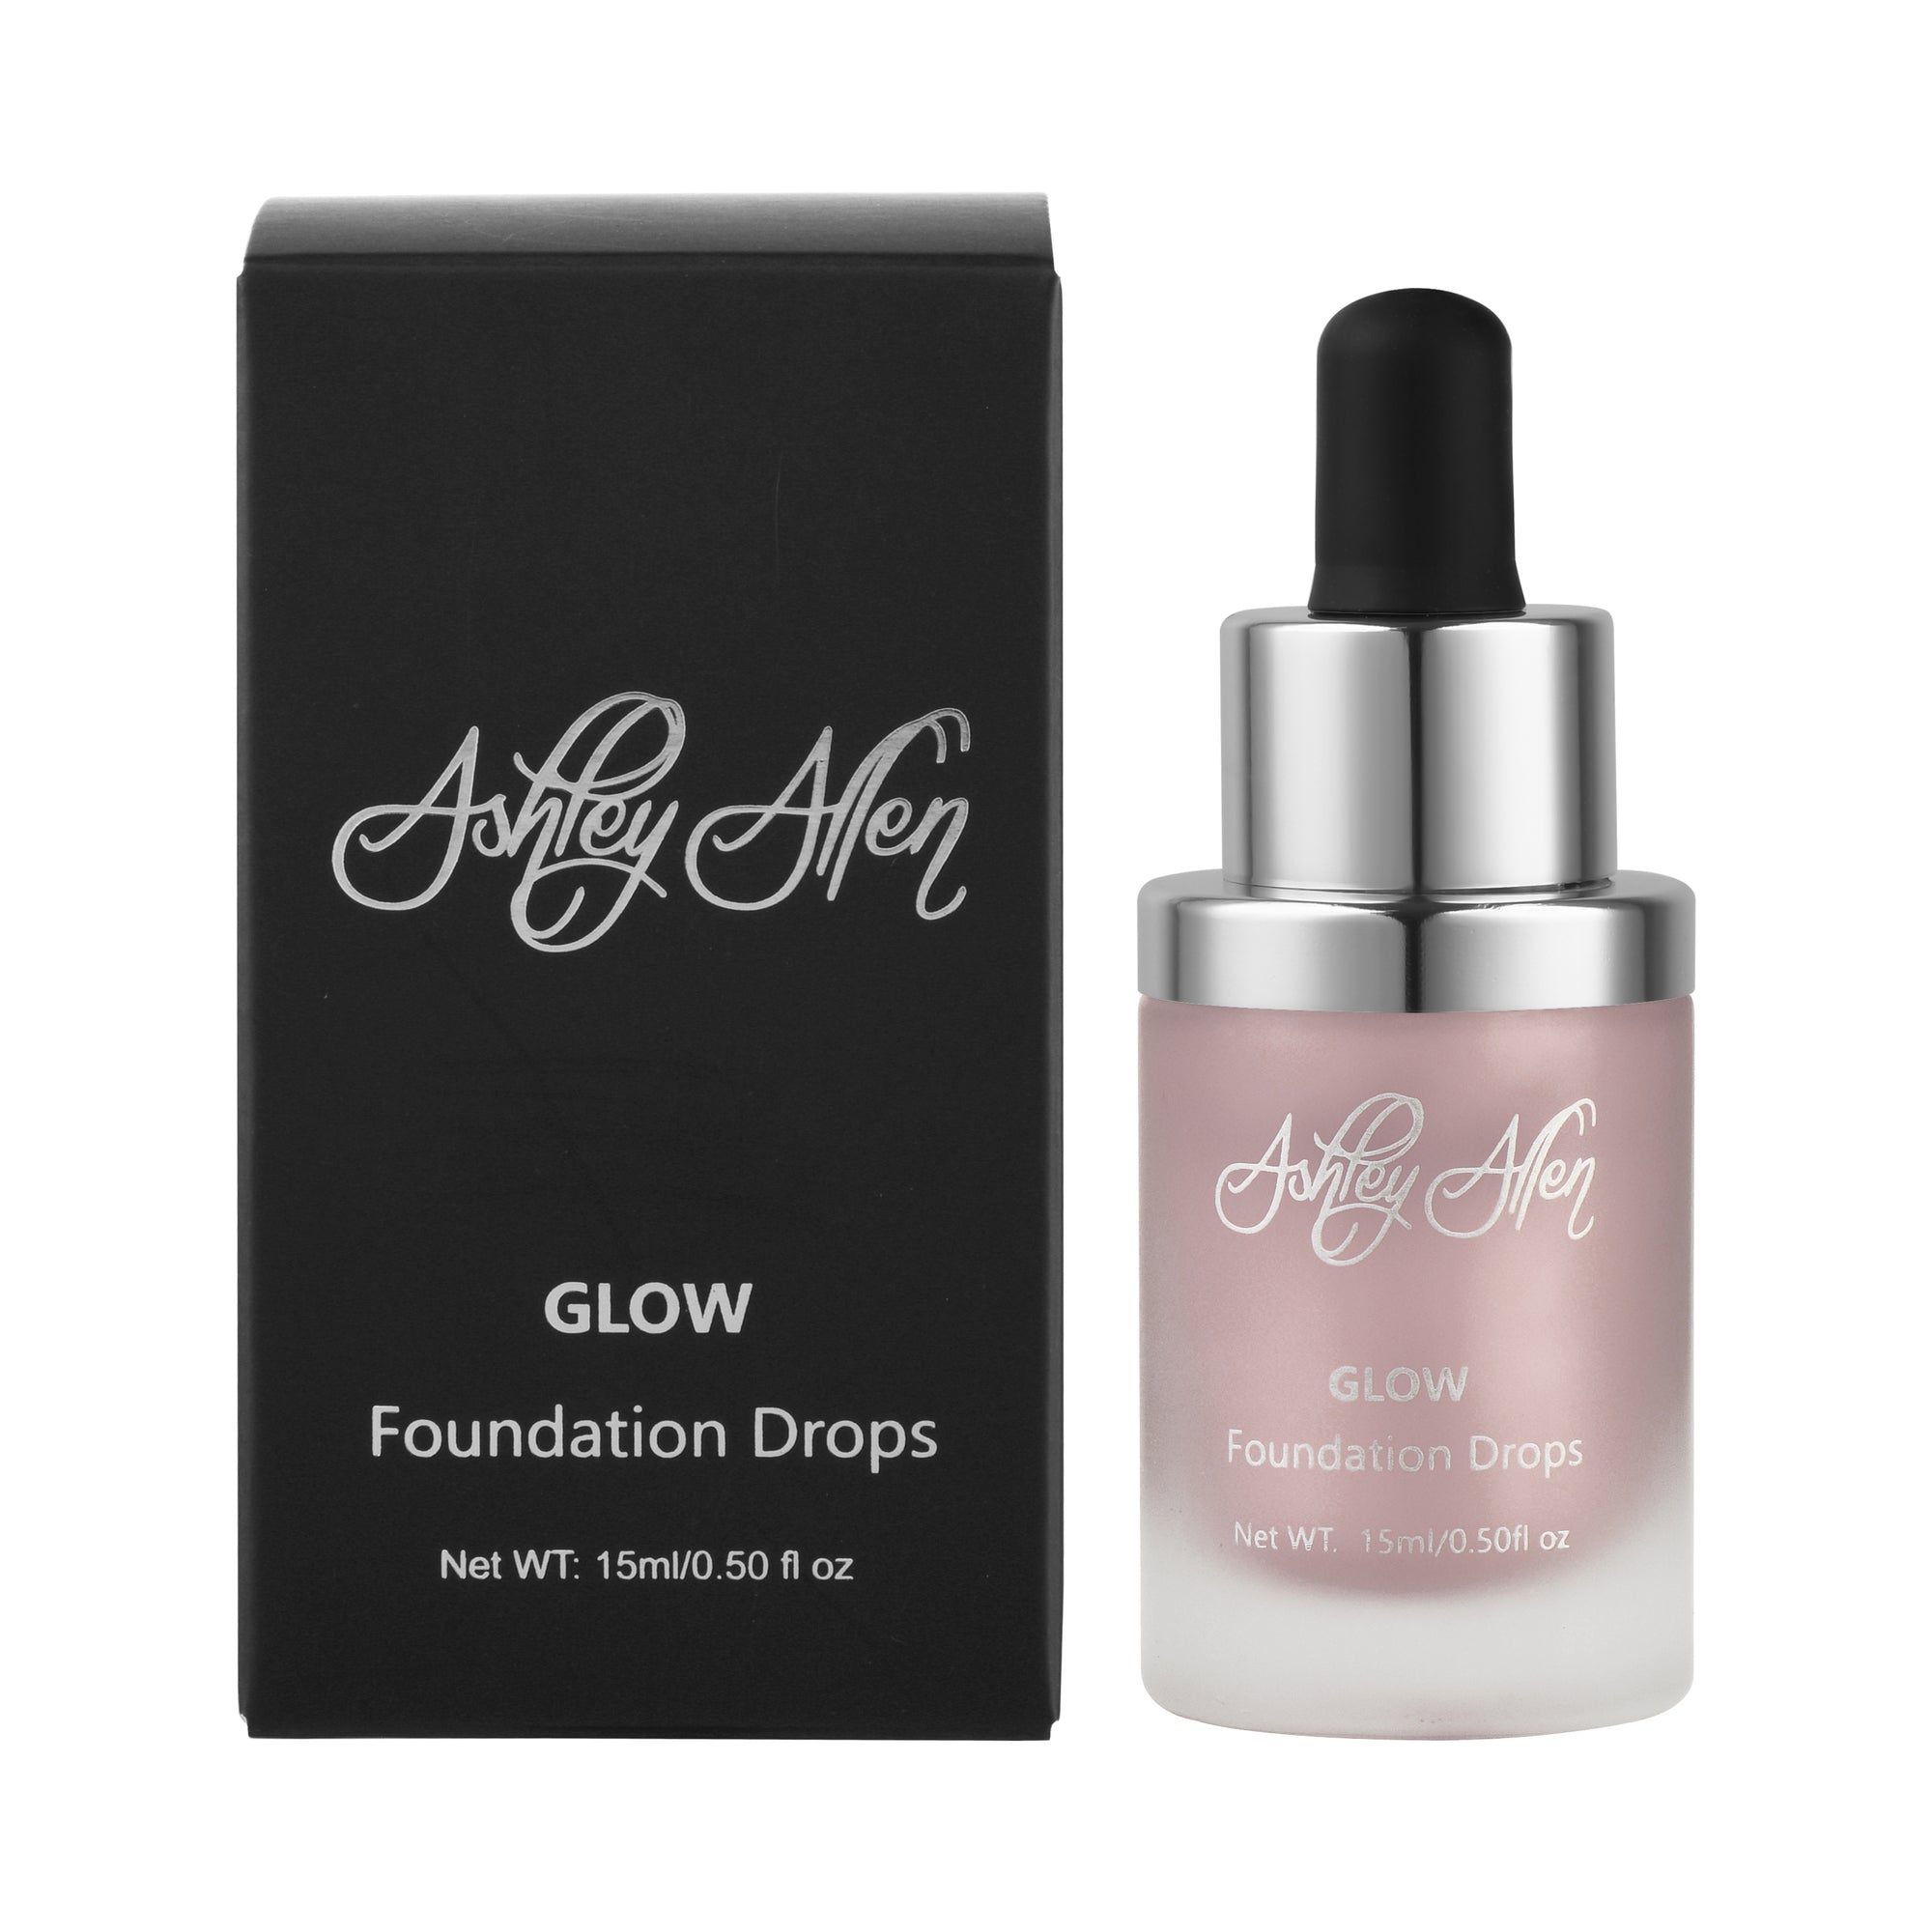 Glow Foundation Drops - Fair  (50% OFF) Will be $17.50 activated at checkout)